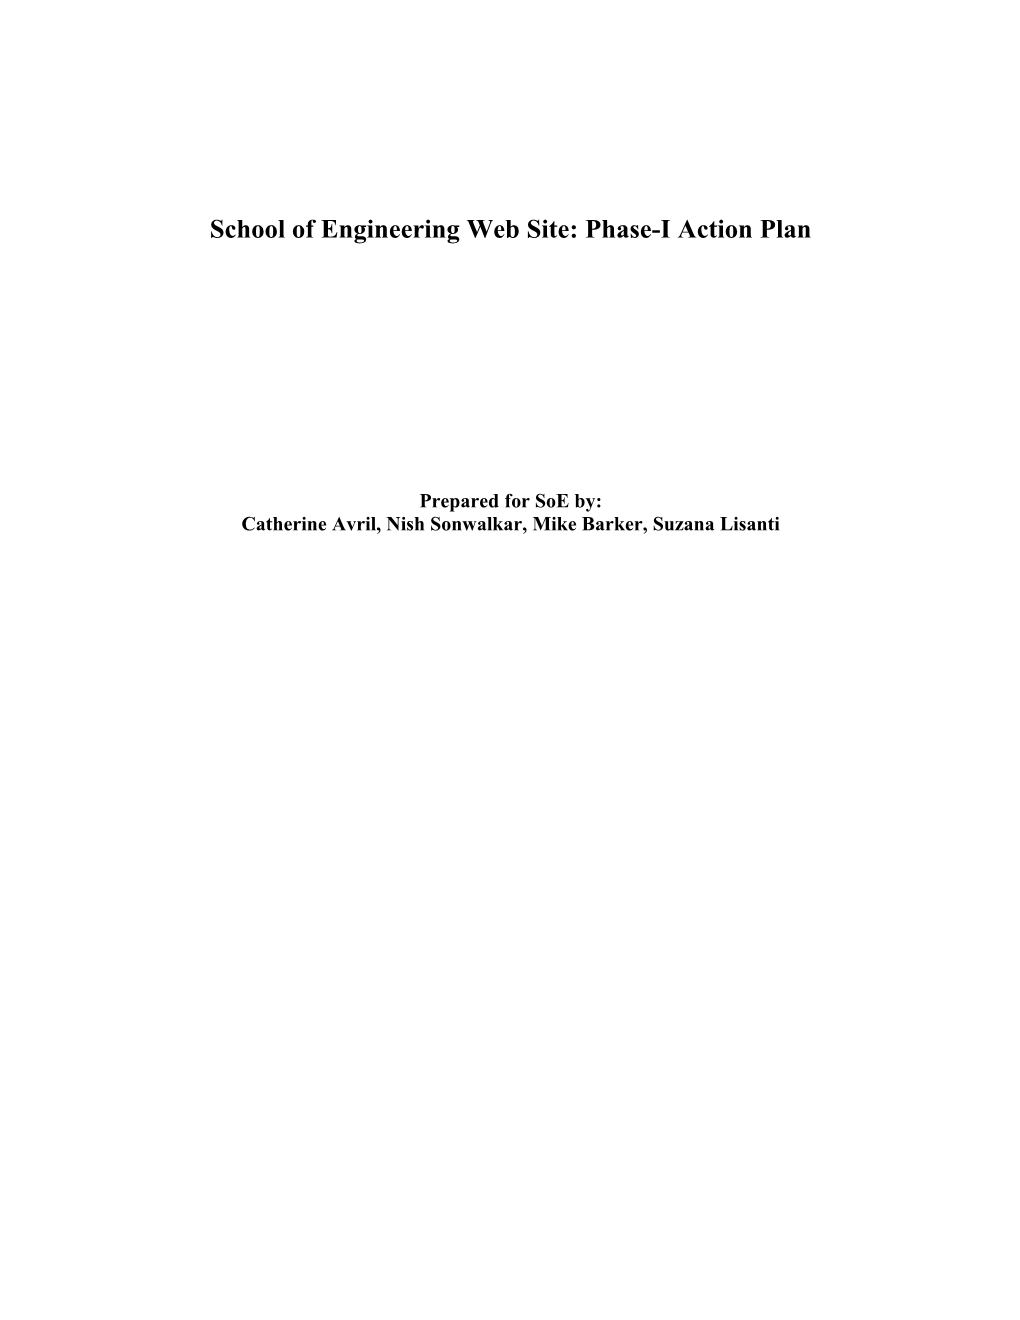 School of Engineering Web Site: Phase-I Action Plan